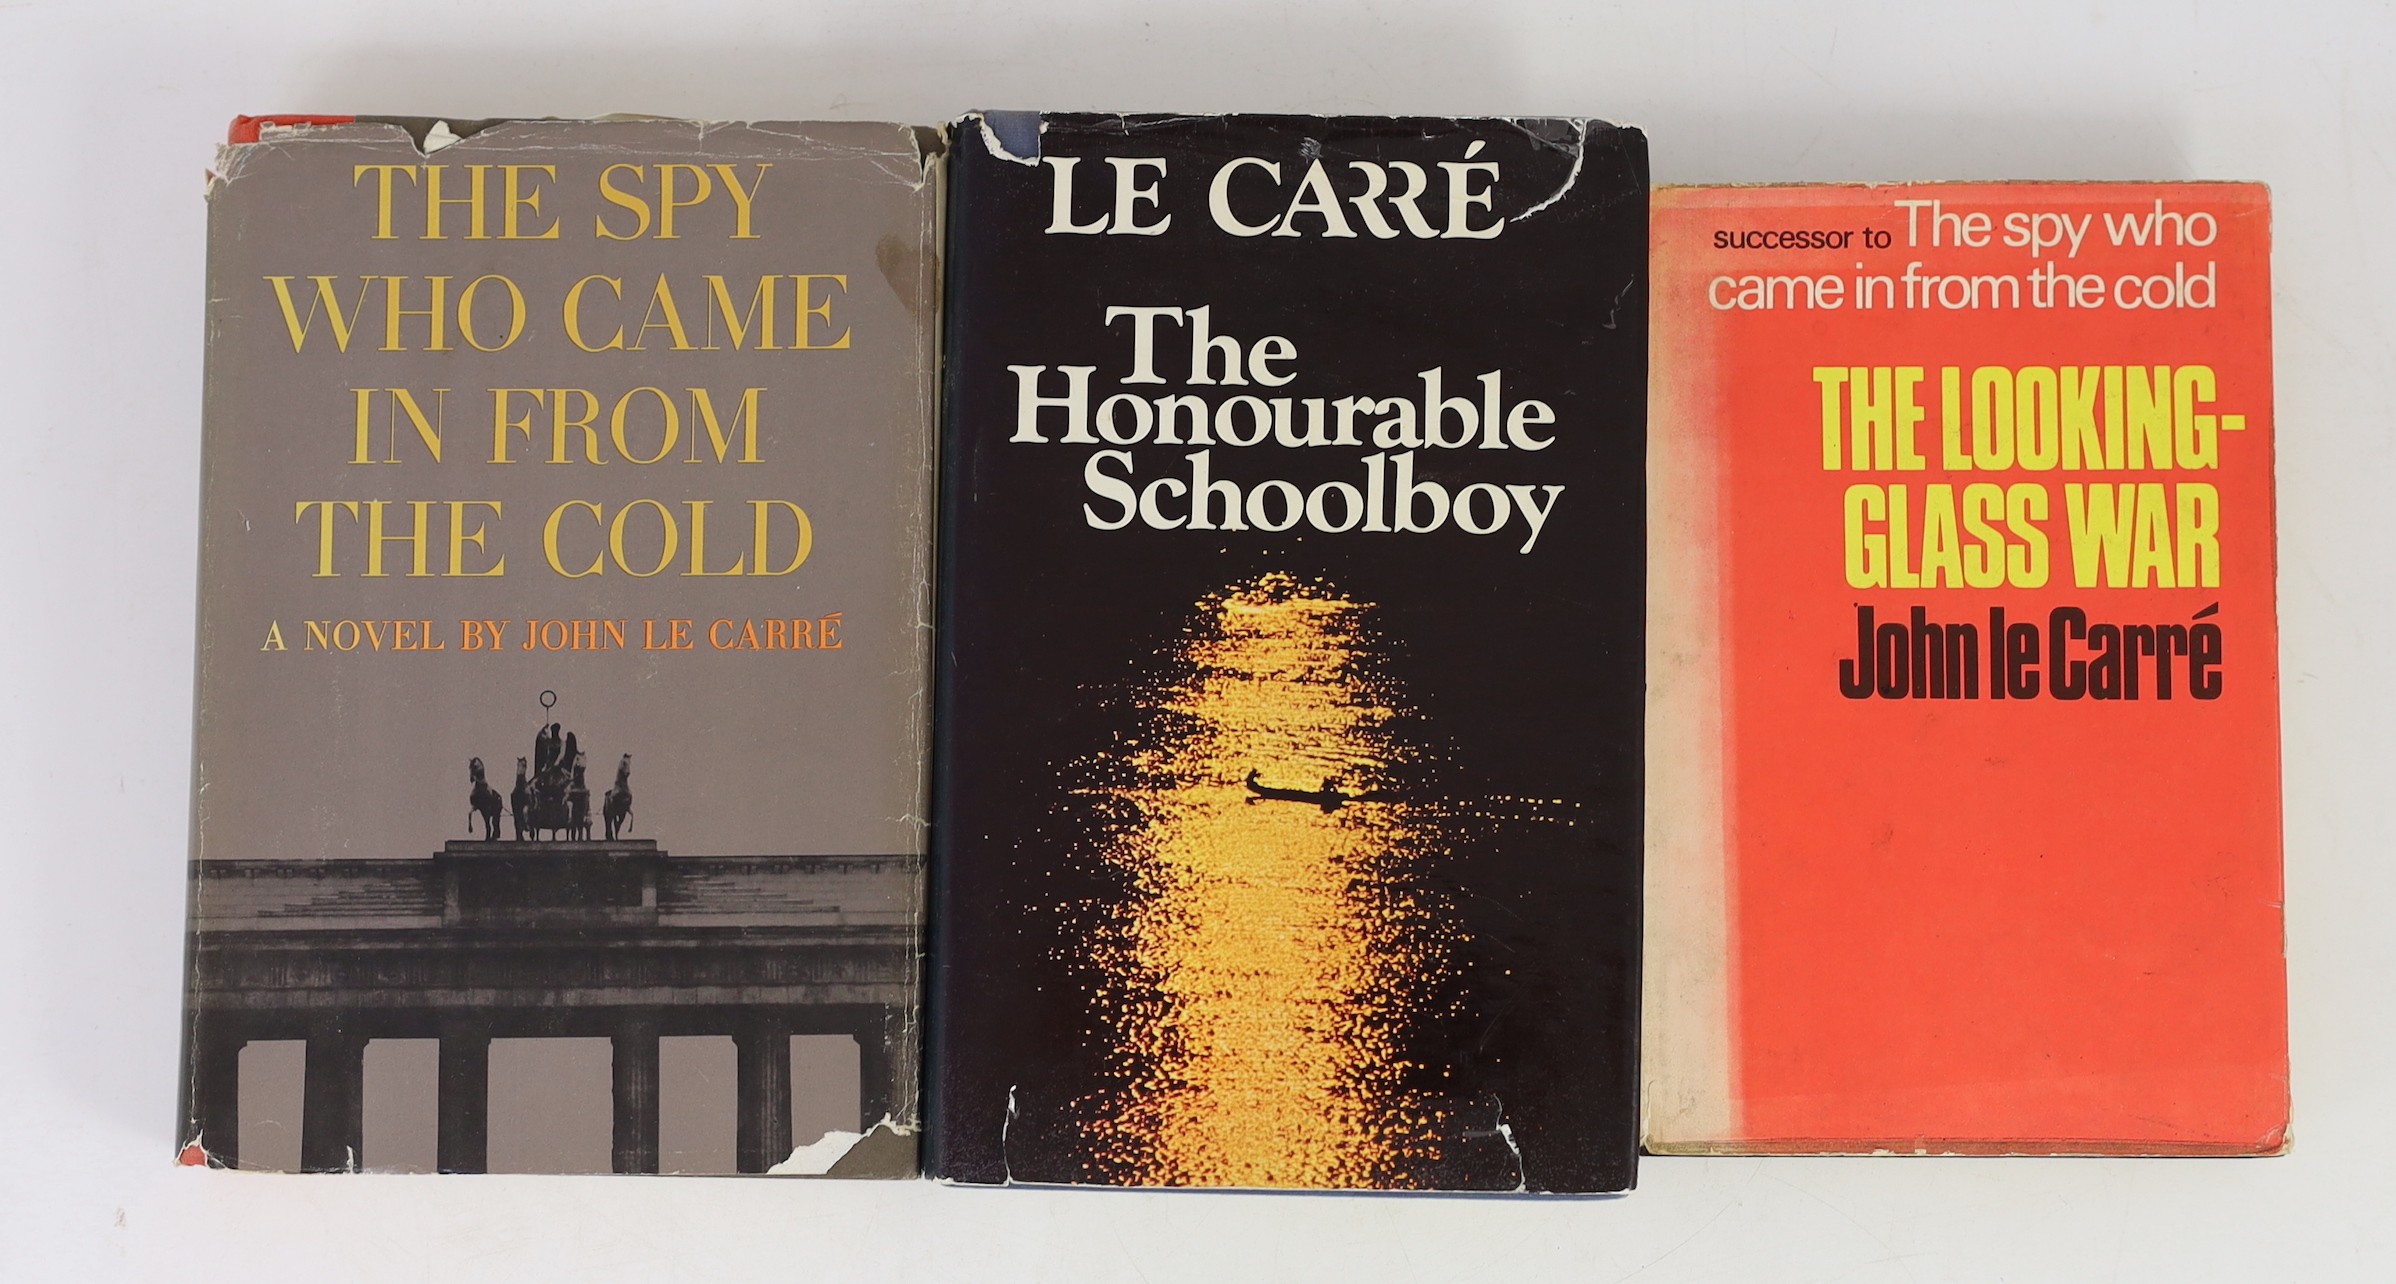 Le Carre, John - 7 Works - The Spy Who Came in from the Cold, 1st American edition, 8vo cloth, in torn d/j, Coward McCann, New York, 1964; The Honourable Schoolboy, 8vo, cloth in torn d/j, Hodder and Stoughton, London, t